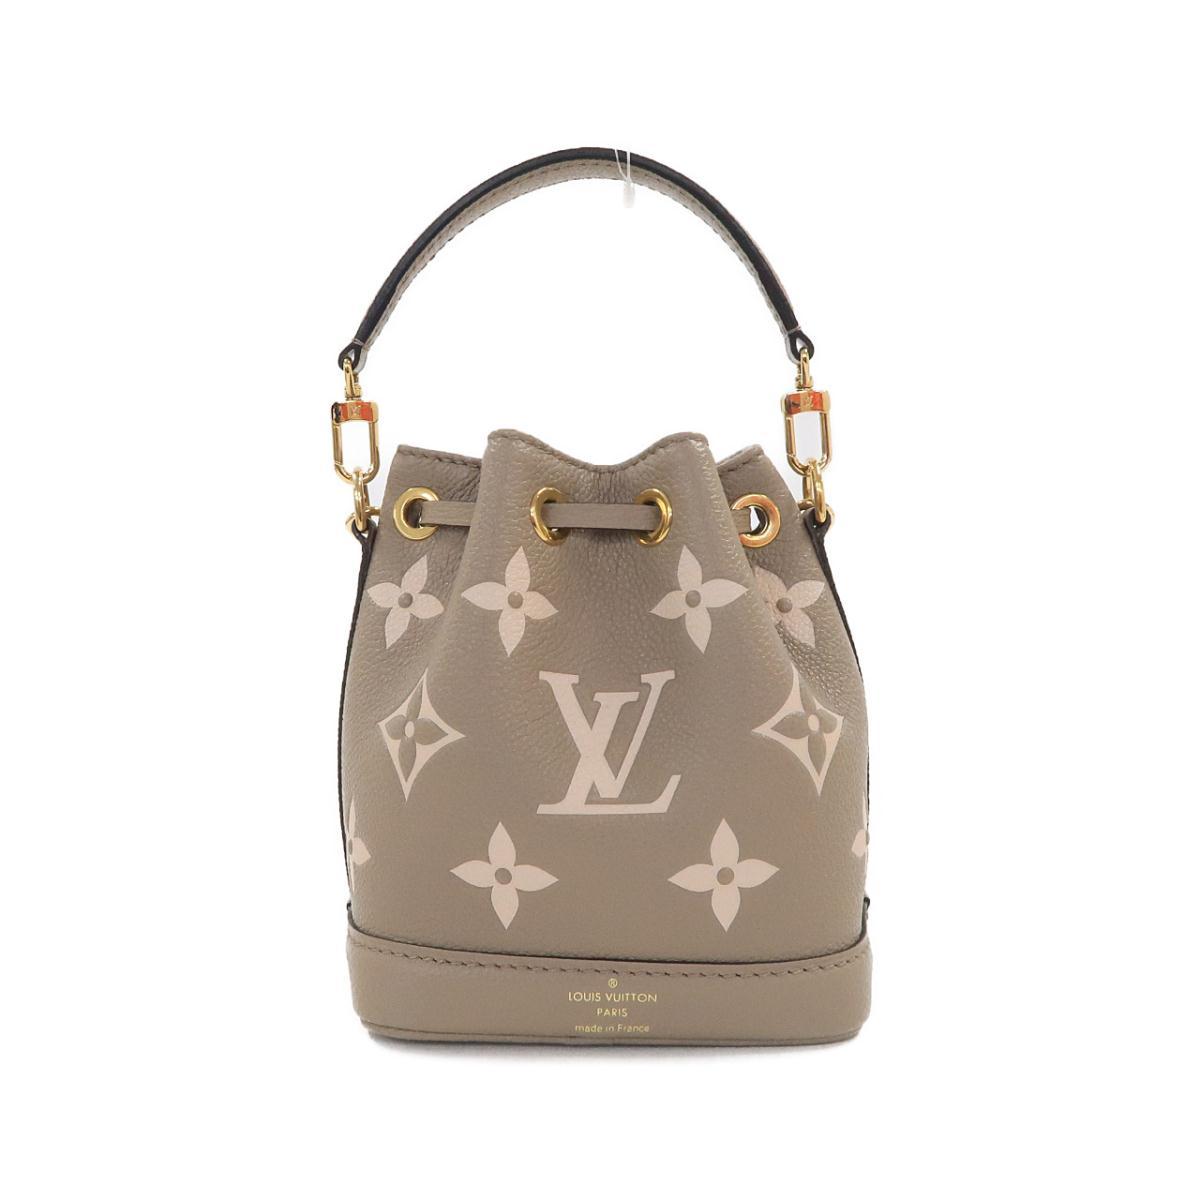 How To Spot A Fake Louis Vuitton: 10 Questions to Ask - undefined - How To  Spot A Fake Louis Vuitton